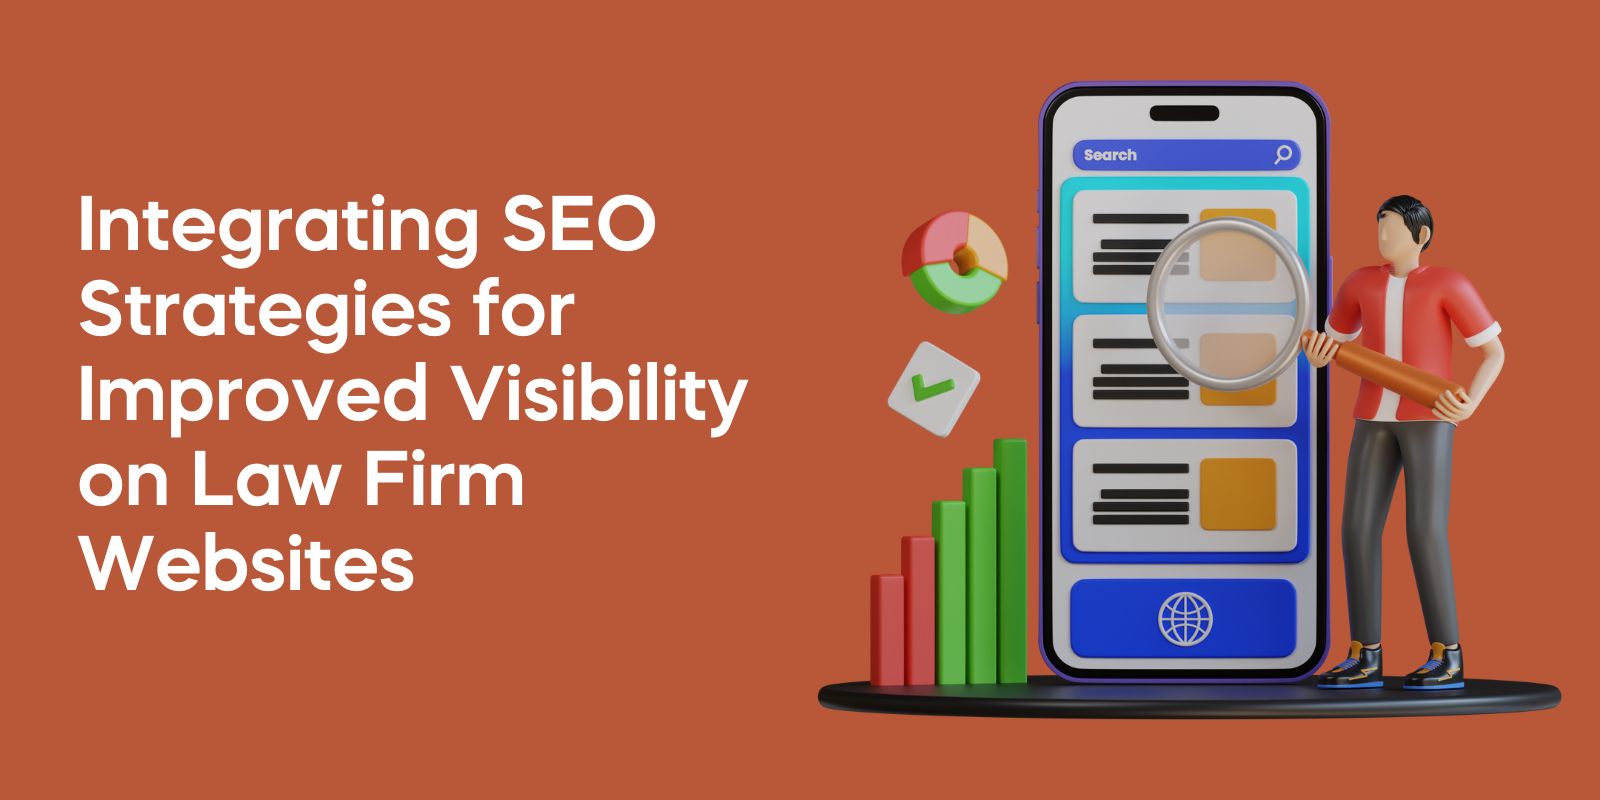 Integrating SEO Strategies for Improved Visibility on Law Firm Websites